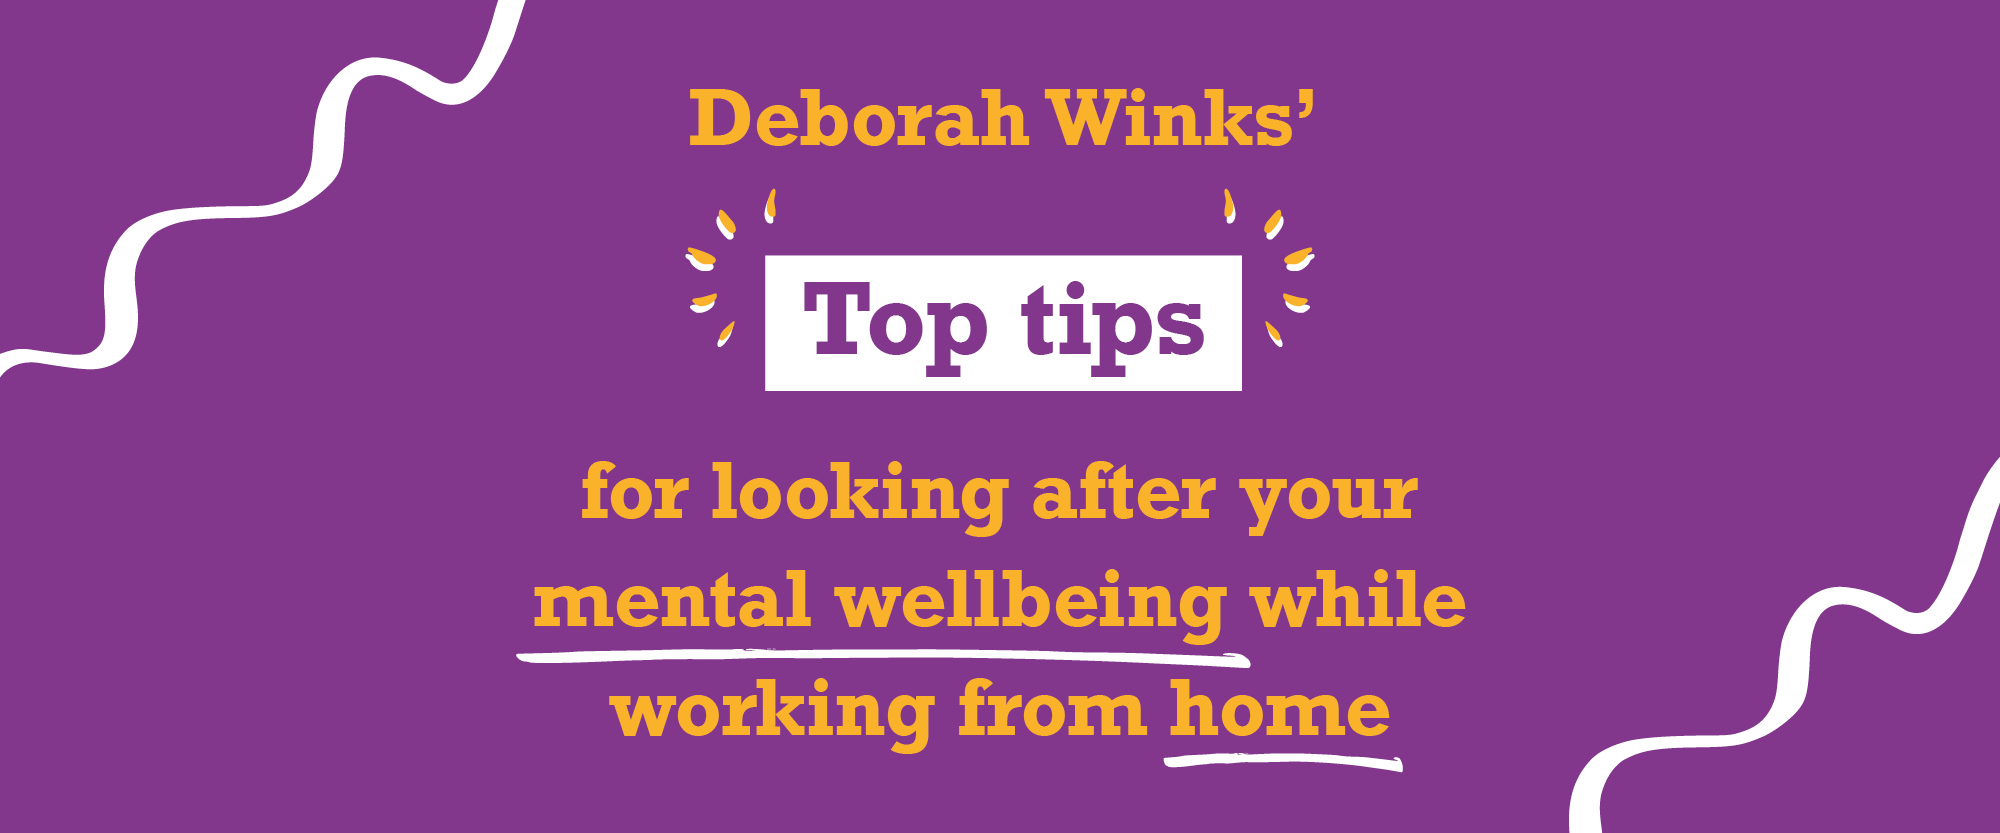 Top tips for looking after your wellbeing while working from home